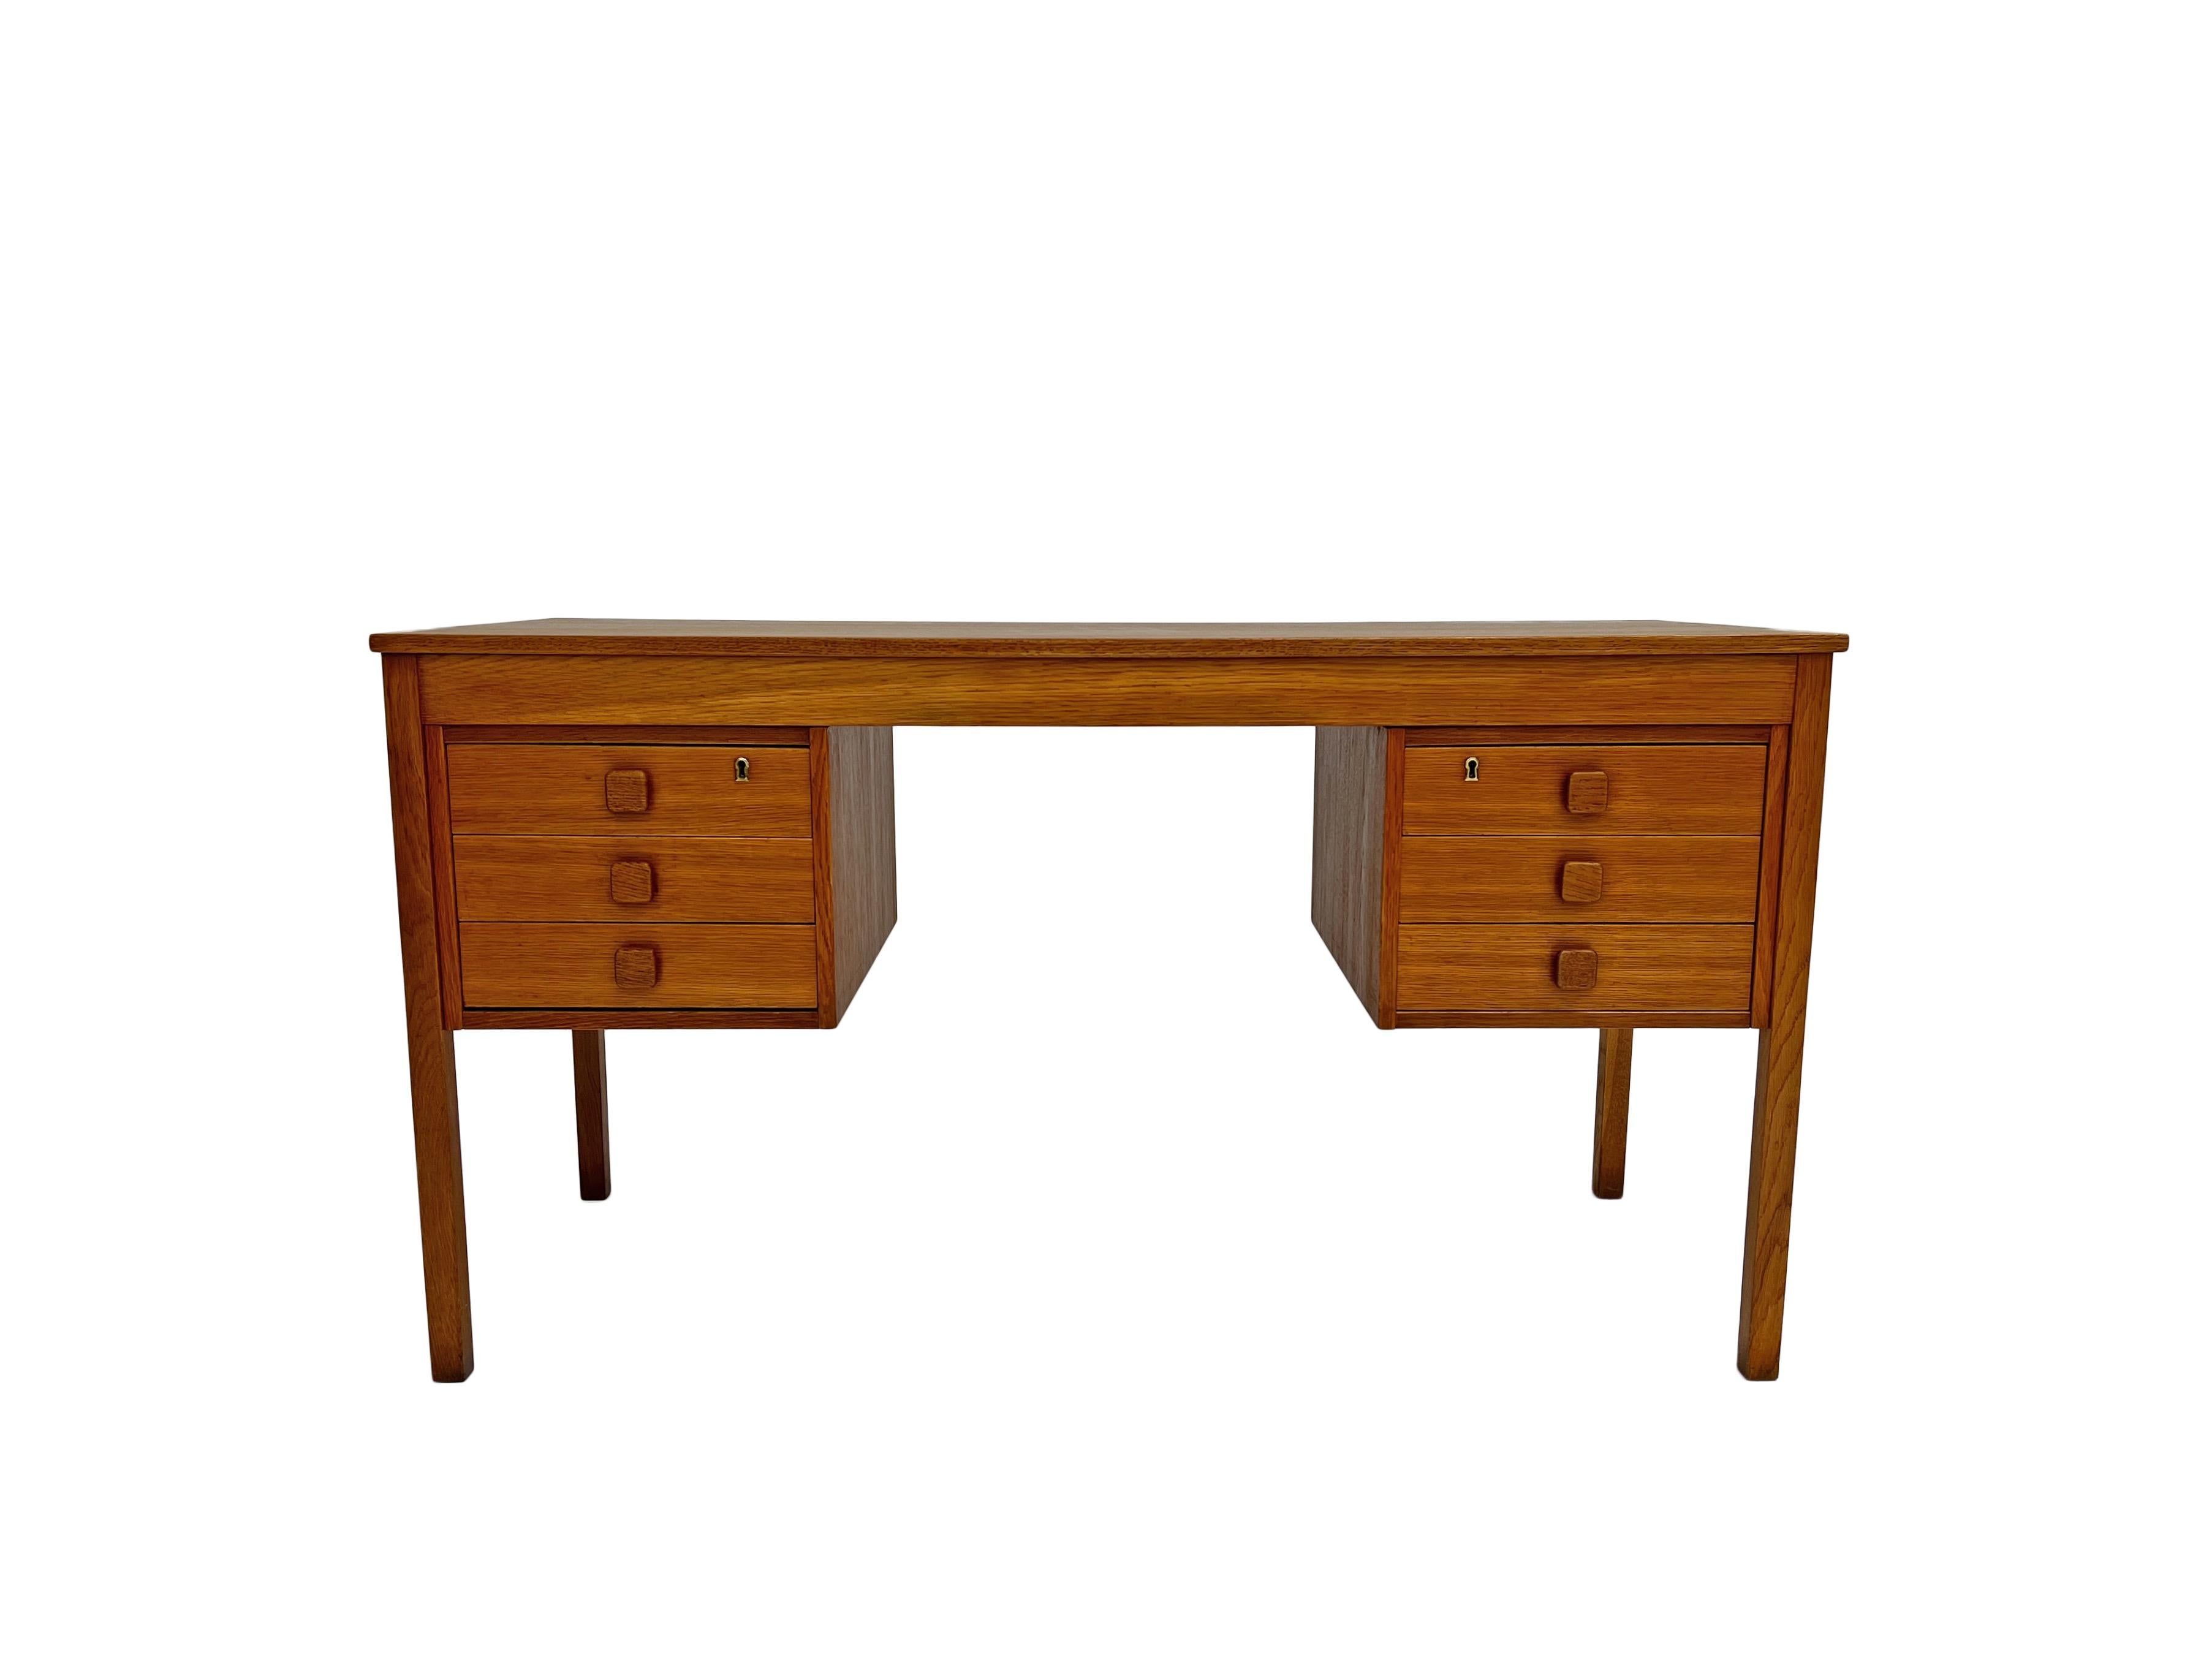 A beautiful Danish oak pedestal writing desk by Domino Møbler, this would make a stylish addition to any work area. A striking piece of classically designed Scandinavian furniture.

The desk has two banks of three drawers, all are in good order with